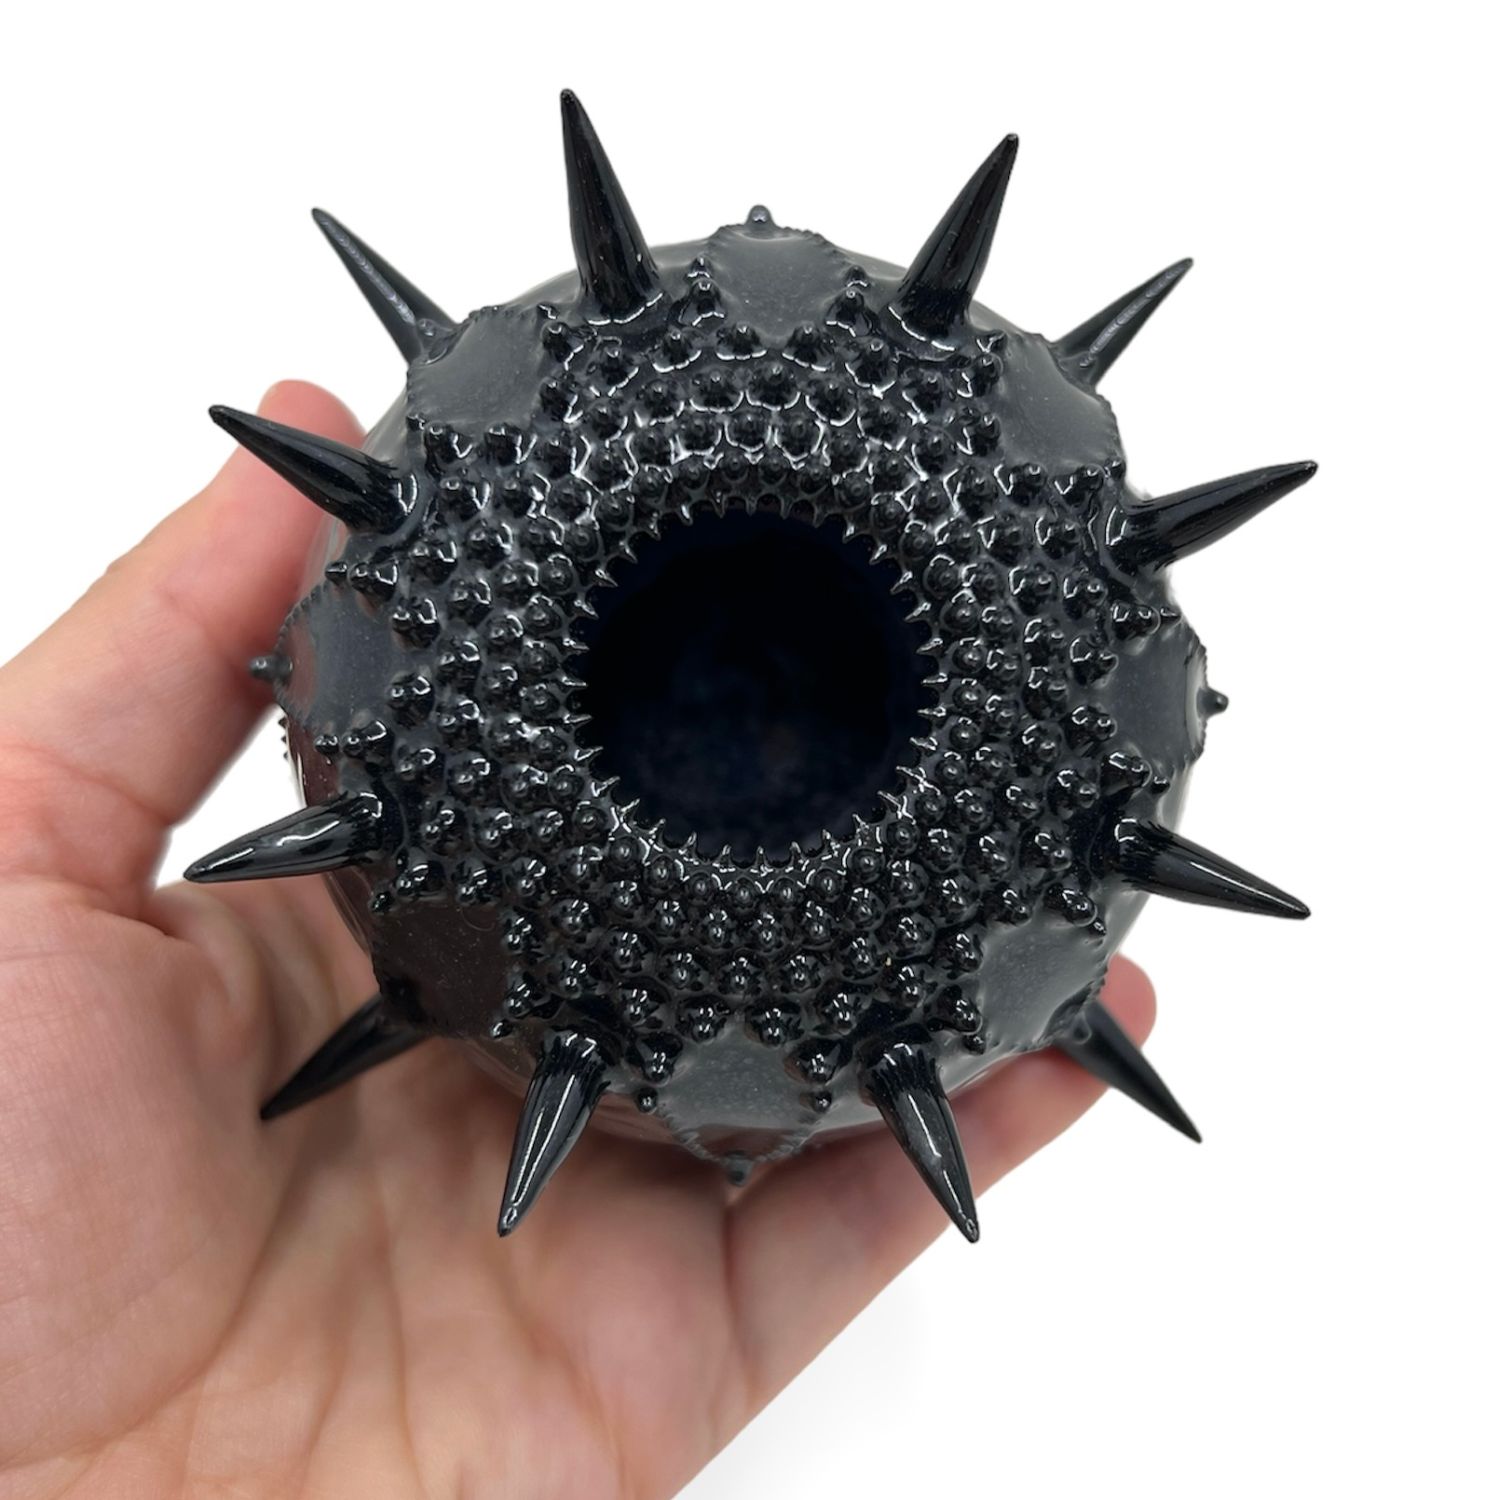 Zara Gardner: Black Urchin Sculpture with Spikes Product Image 4 of 4